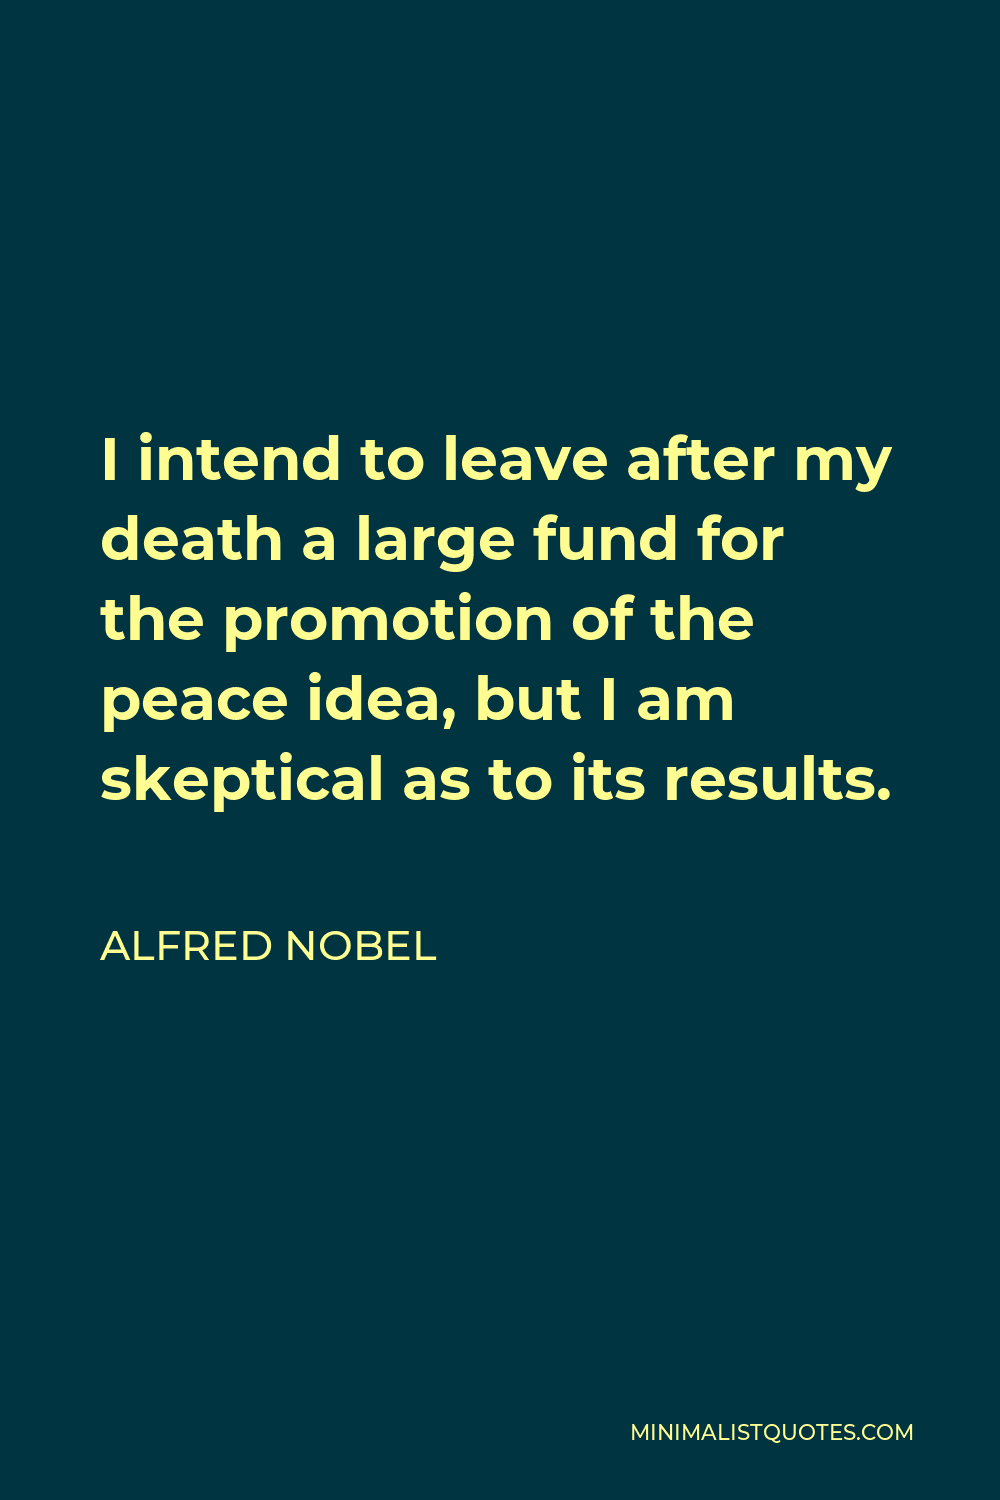 Alfred Nobel Quote - I intend to leave after my death a large fund for the promotion of the peace idea, but I am skeptical as to its results.